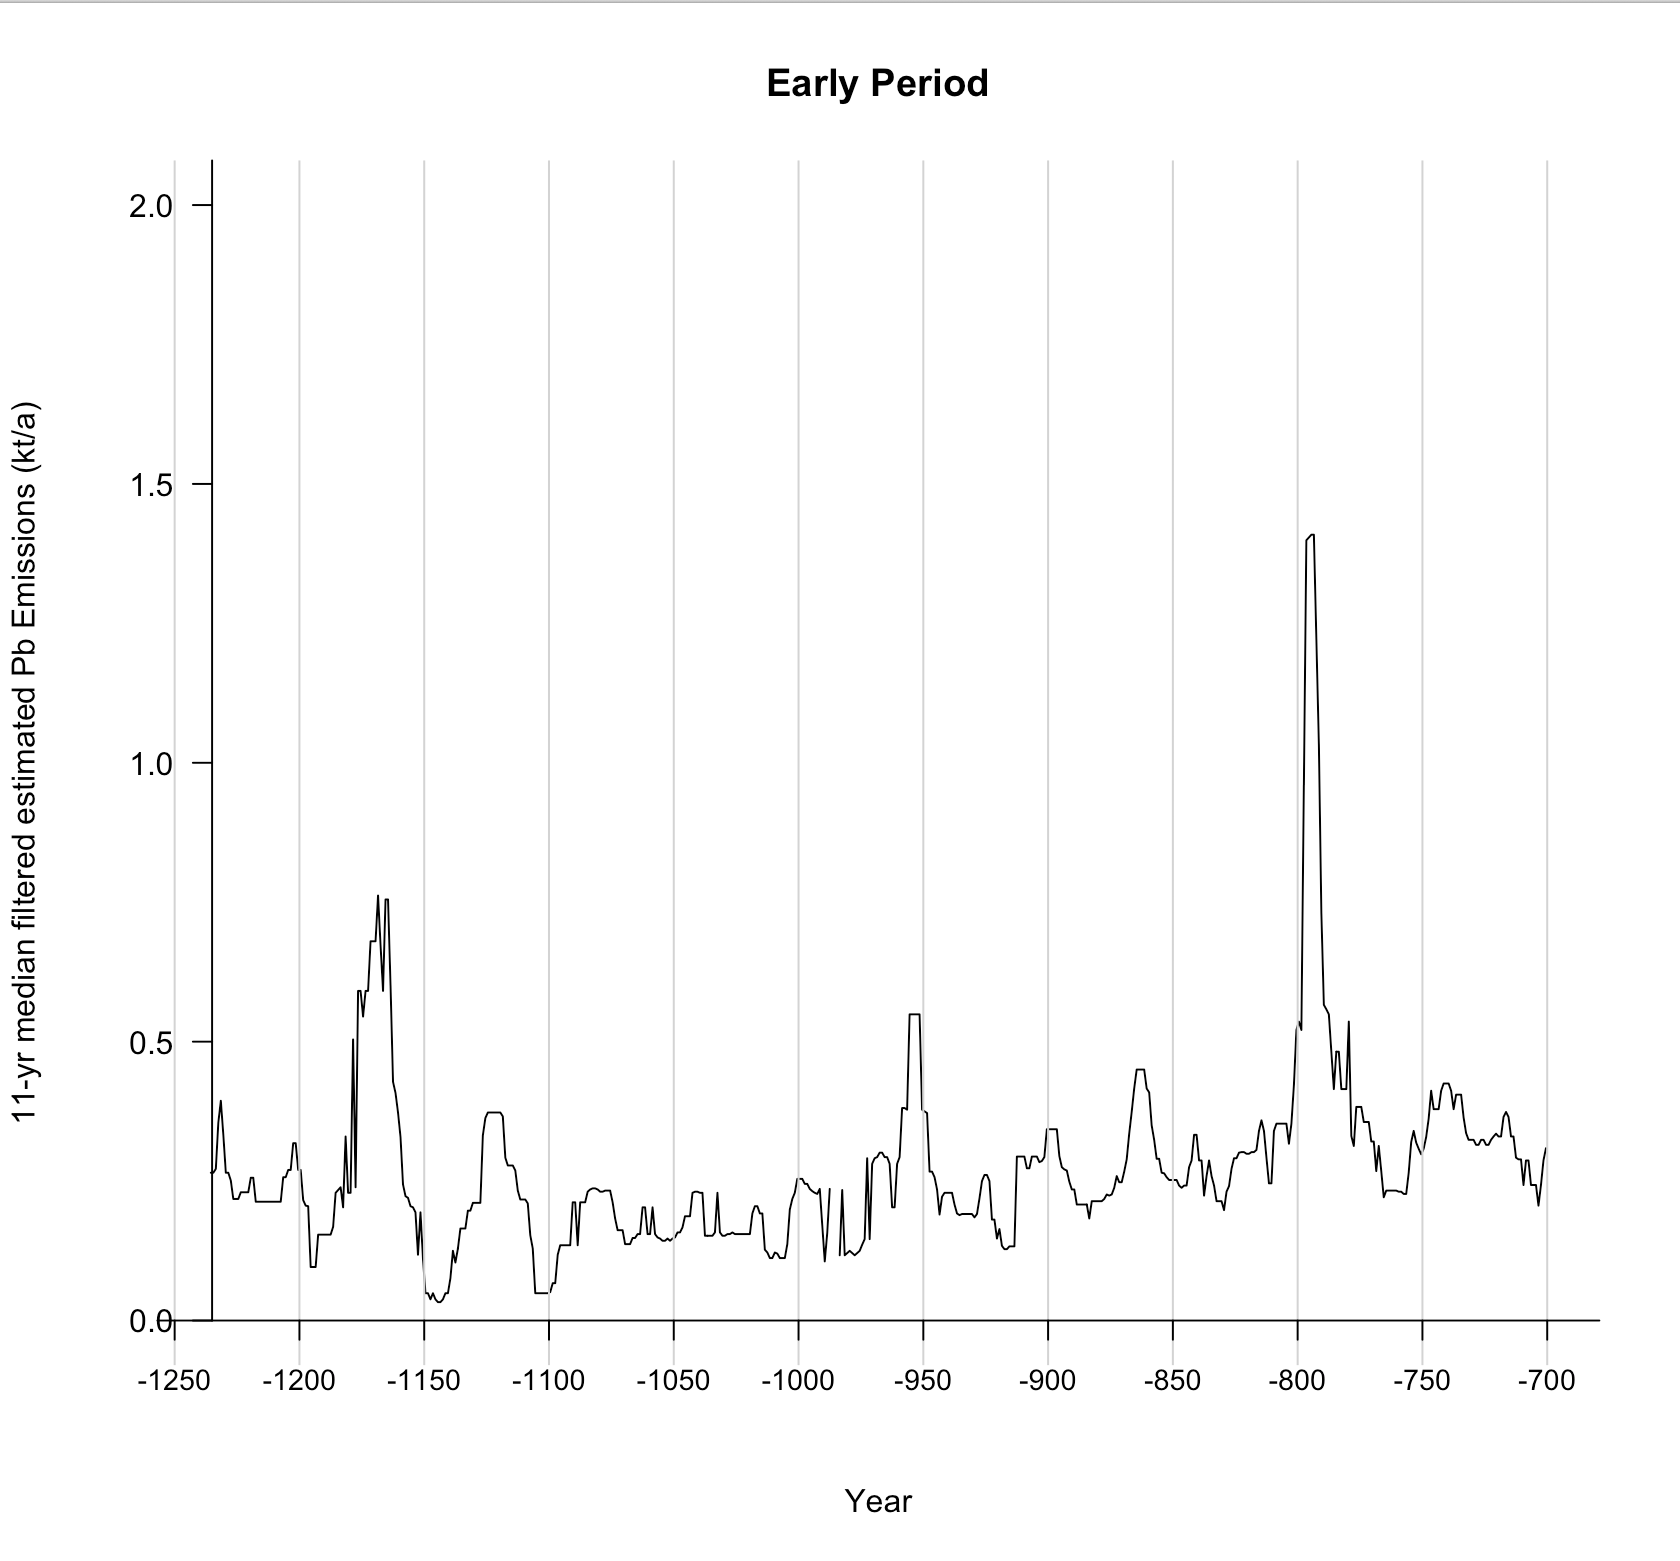 Early period data